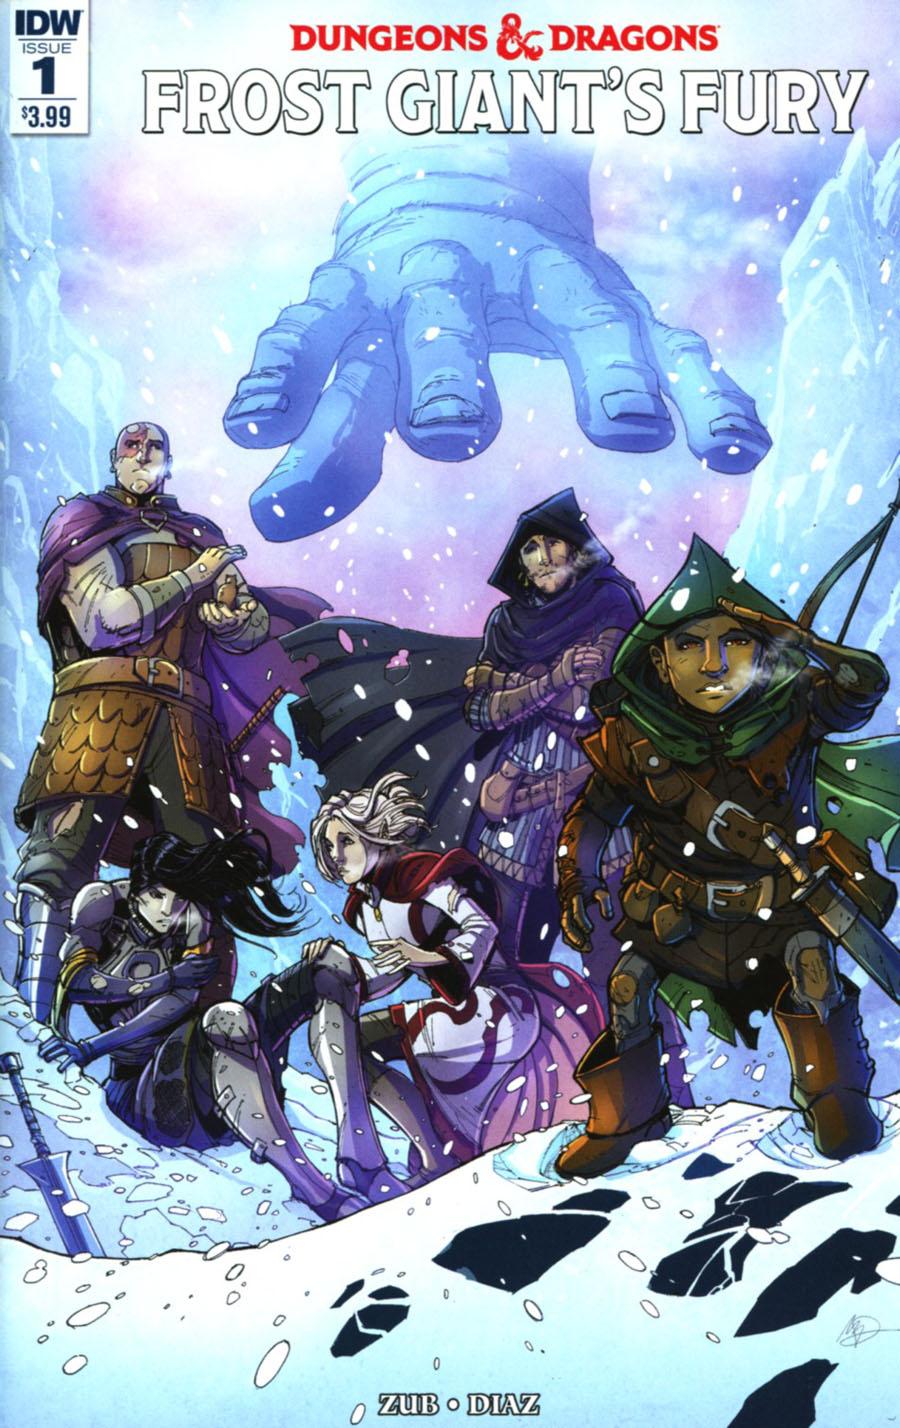 Dungeons & Dragons Frost Giants Fury Vol. 1 #1